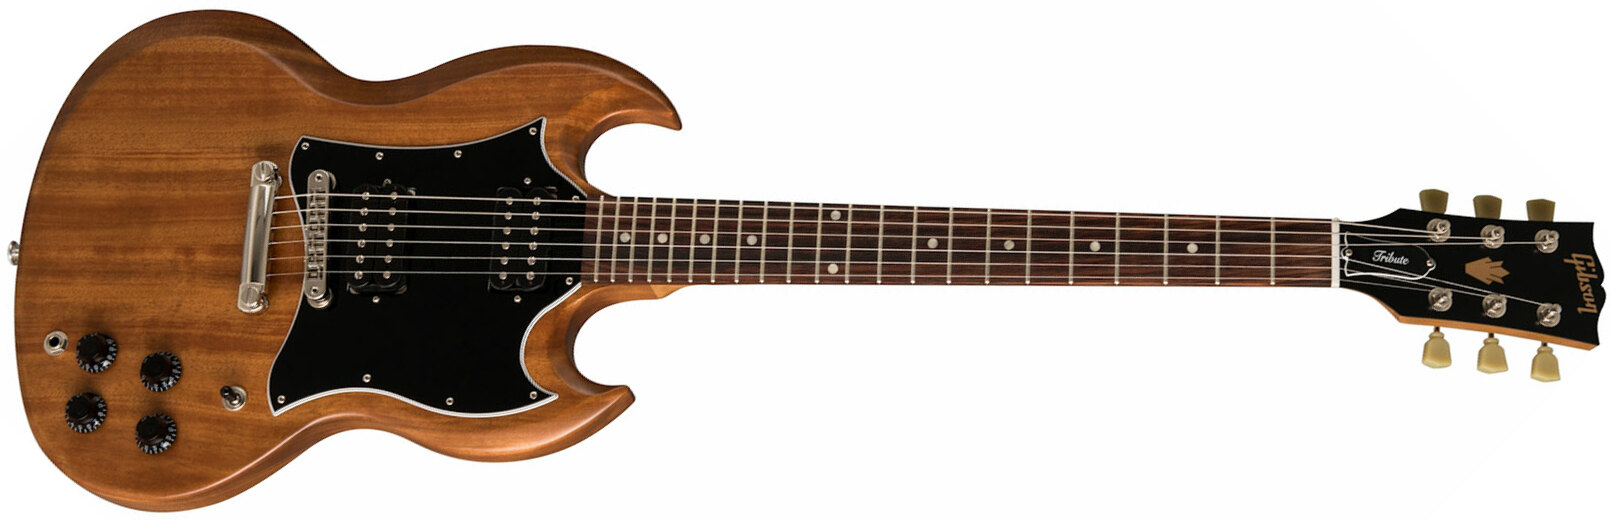 Gibson Sg Tribute Modern 2h Ht Rw - Natural Walnut - Retro rock electric guitar - Main picture